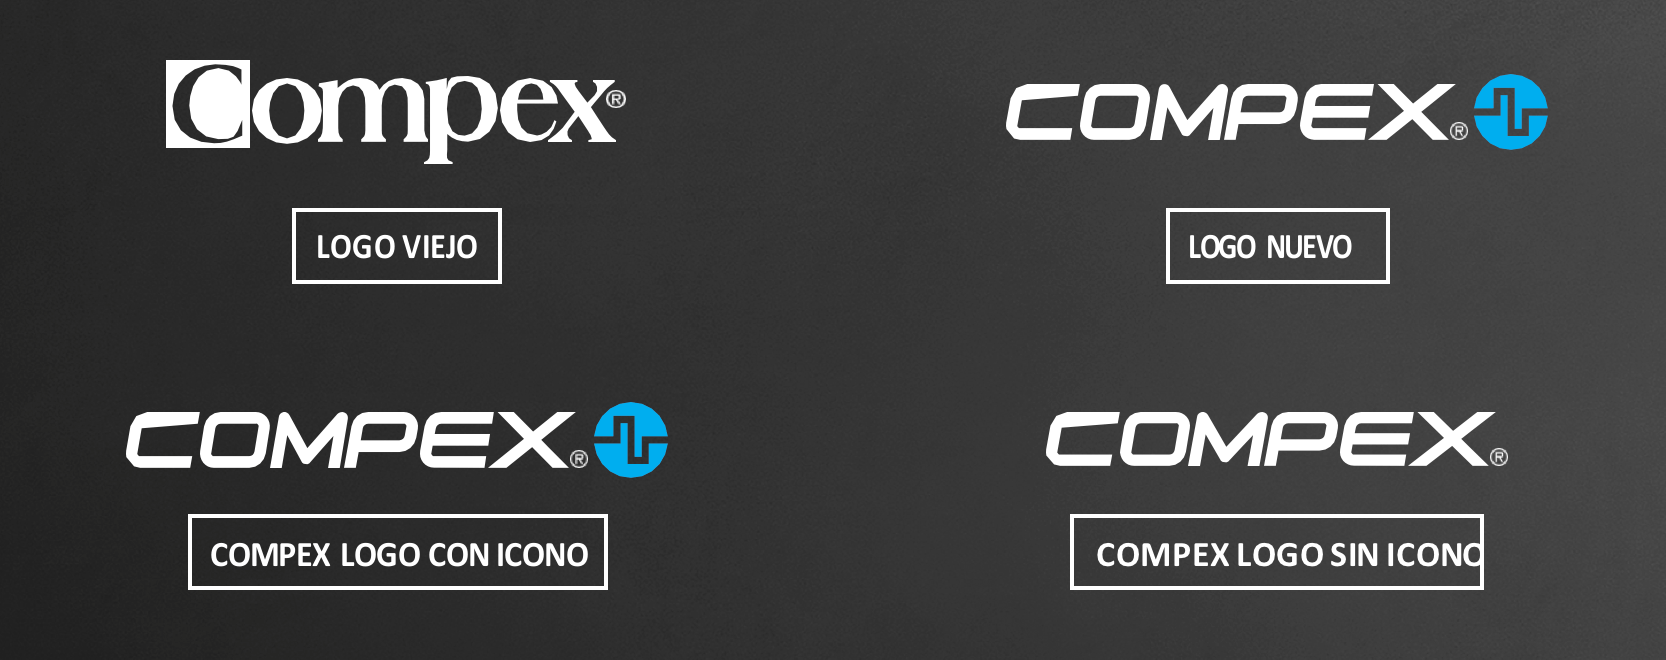 Changes in the Compex logo